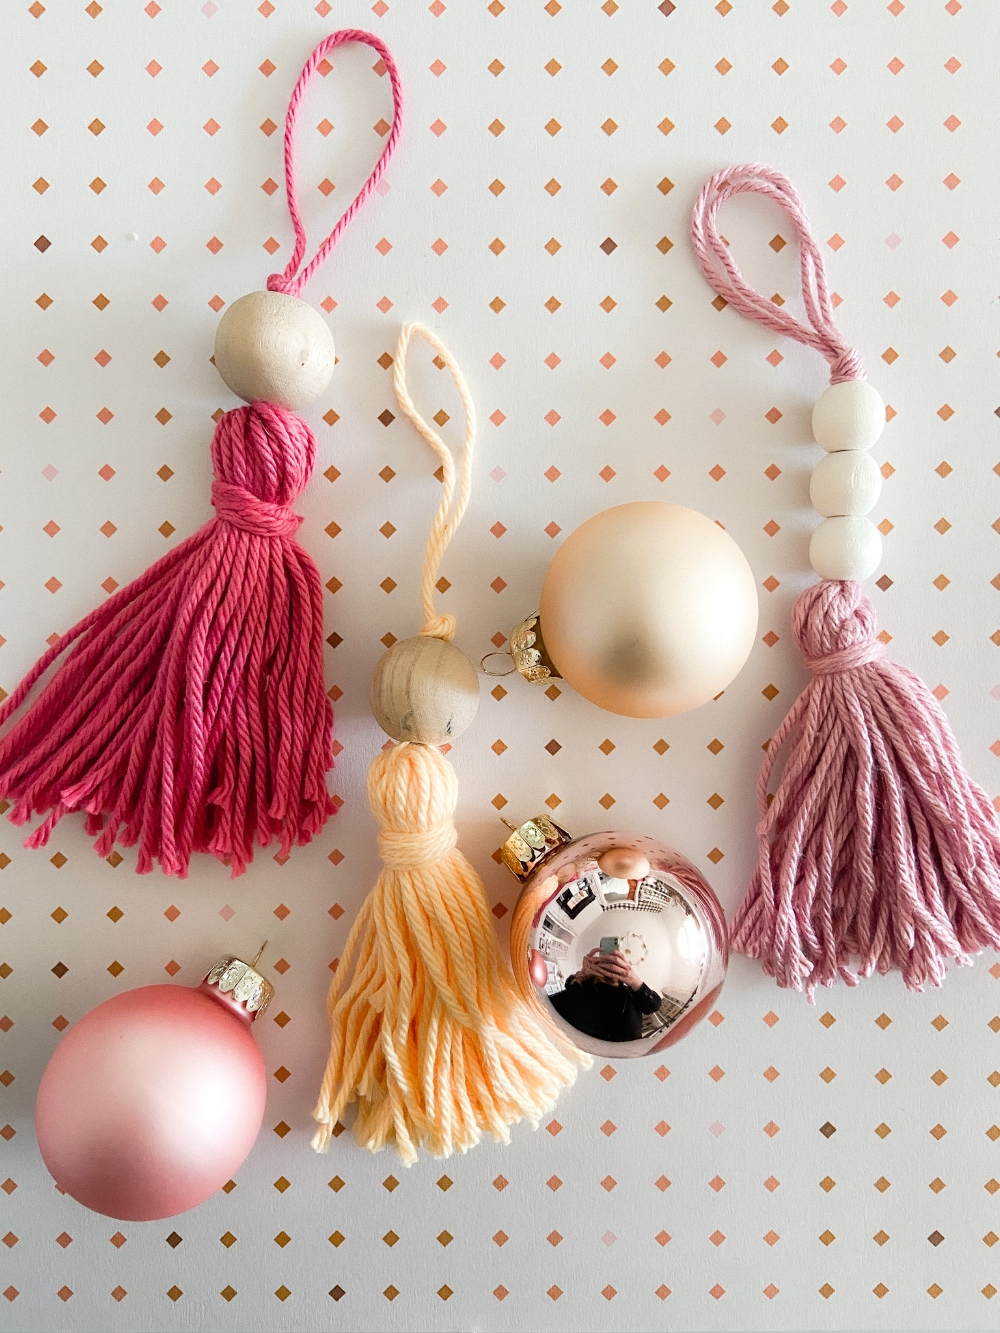 5-Minute Boho Tassel Ornaments. DIY Ornaments don't have to be complicated or expensive. All you need is yarn and beads! 